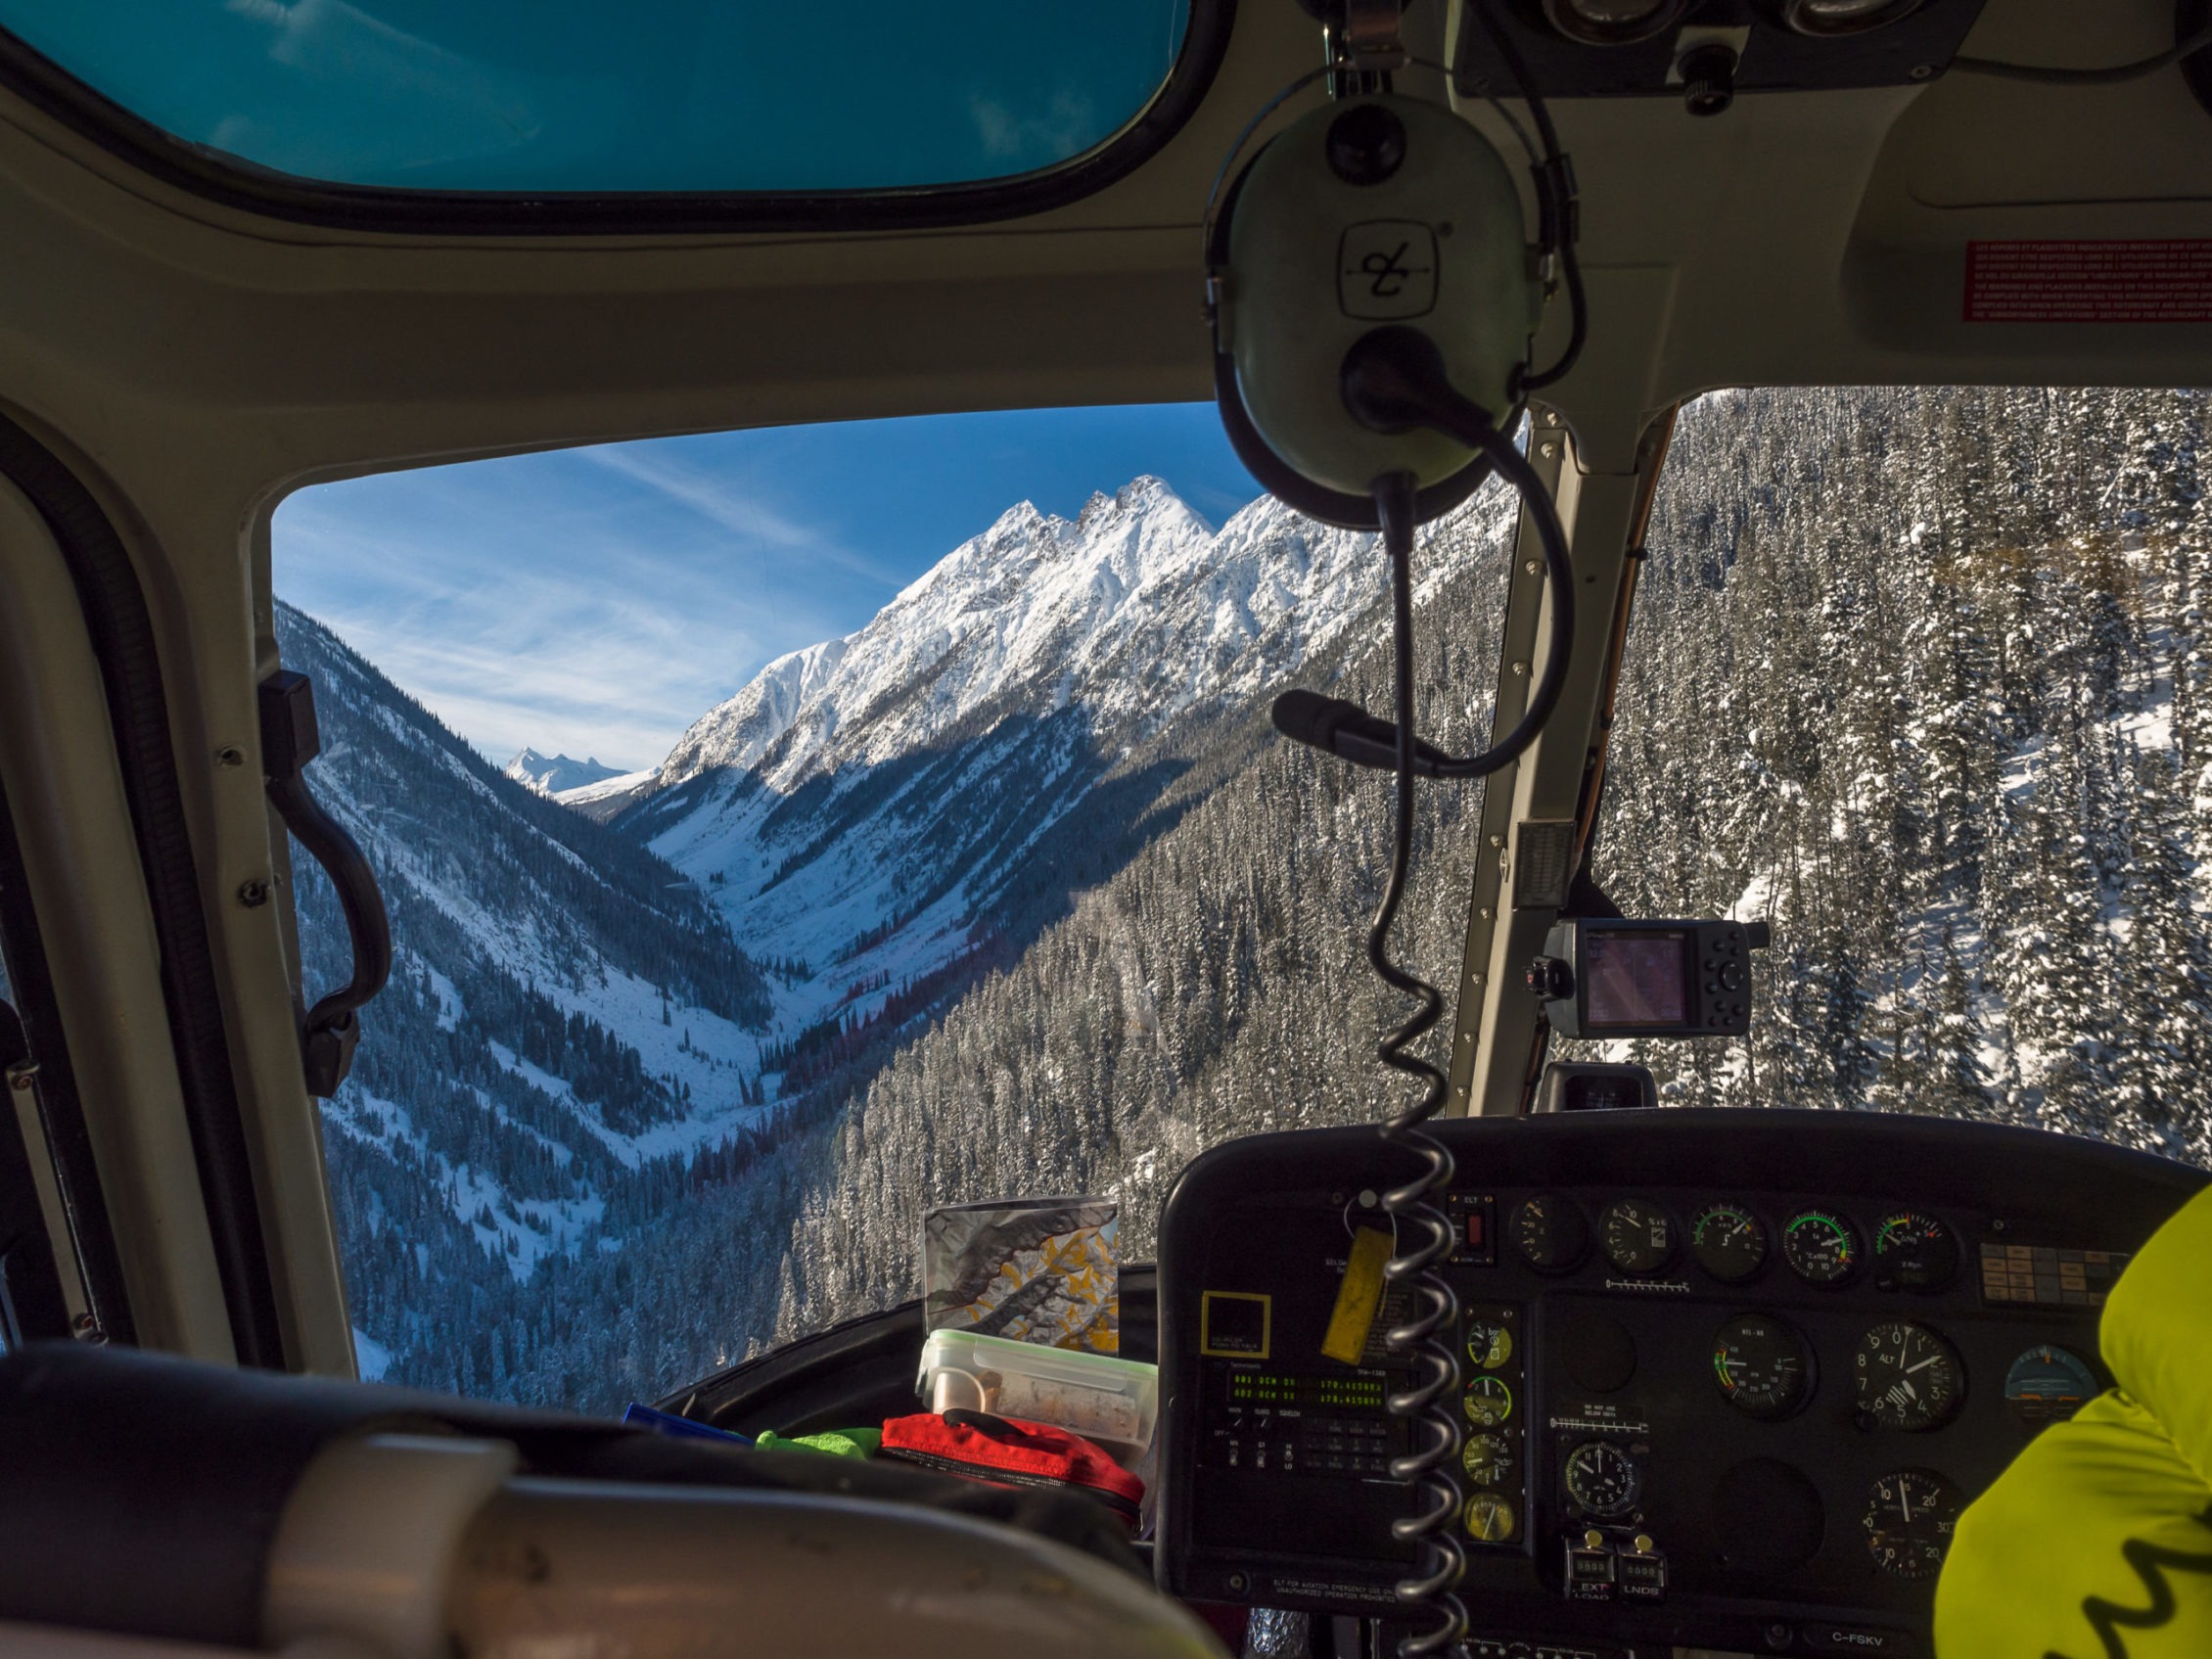 View of snowy mountainside from inside a helicopter